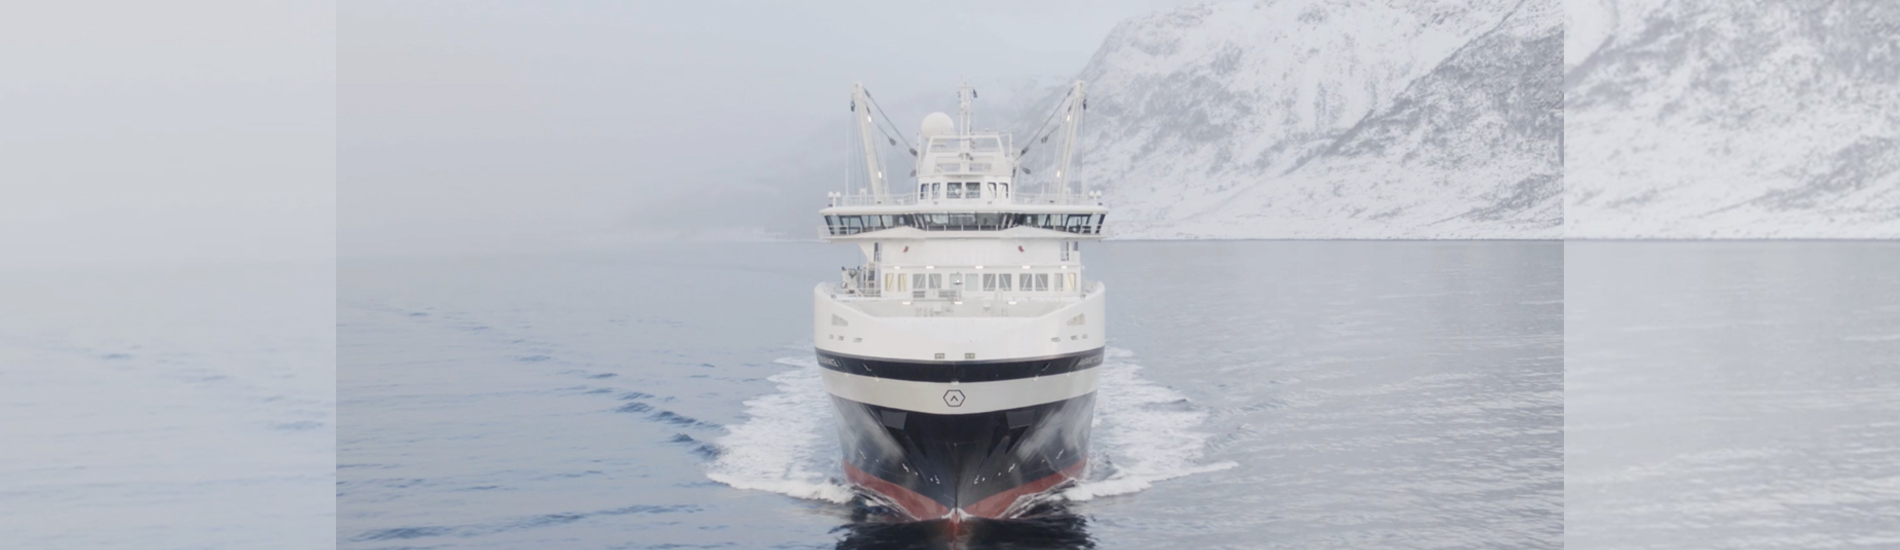 Big Challenge, Small Solution-Antarctic Endurance is the world's very first purpose-built krill harvesting vessel